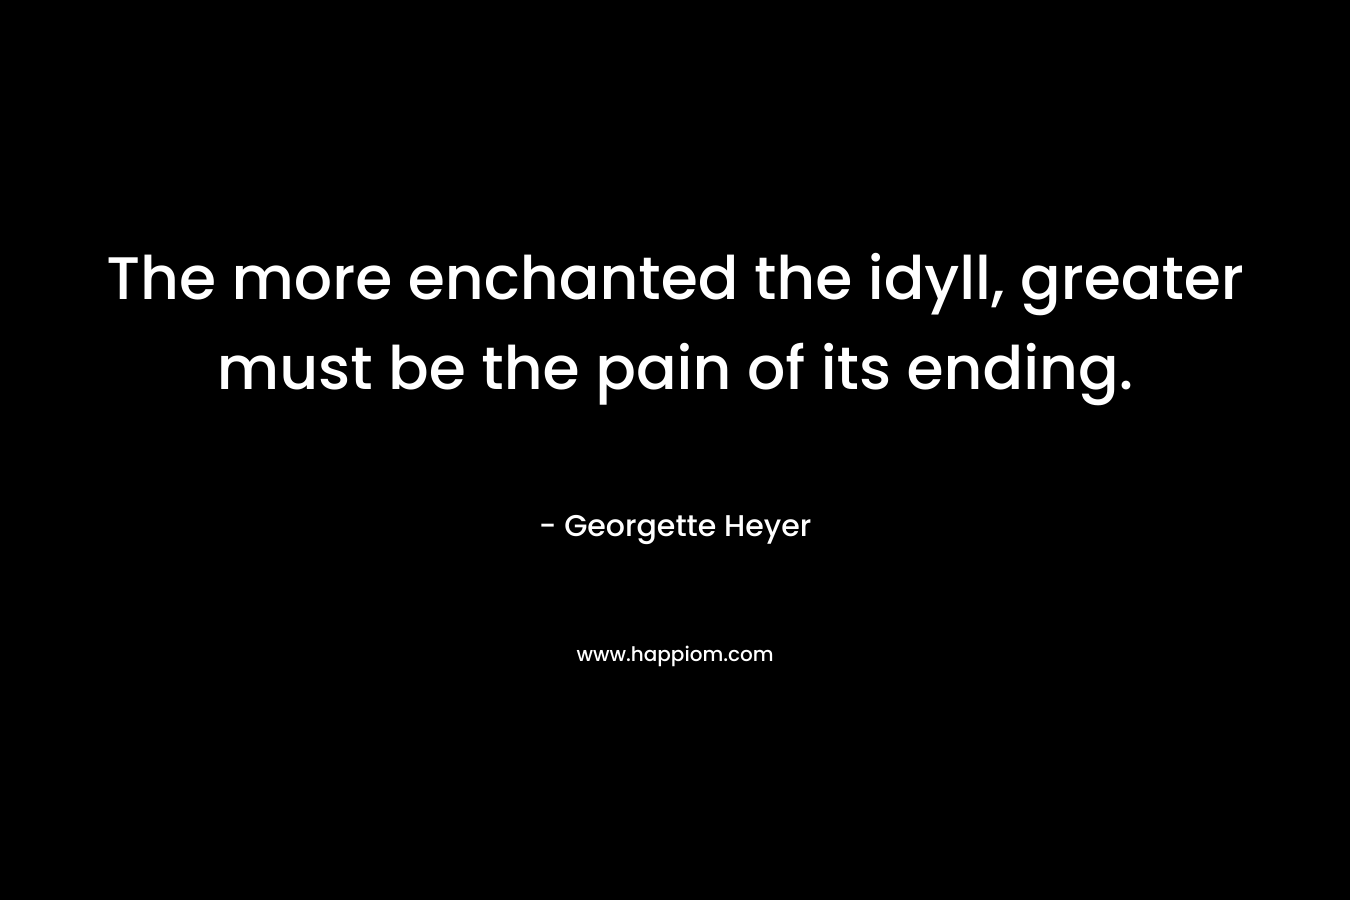 The more enchanted the idyll, greater must be the pain of its ending.